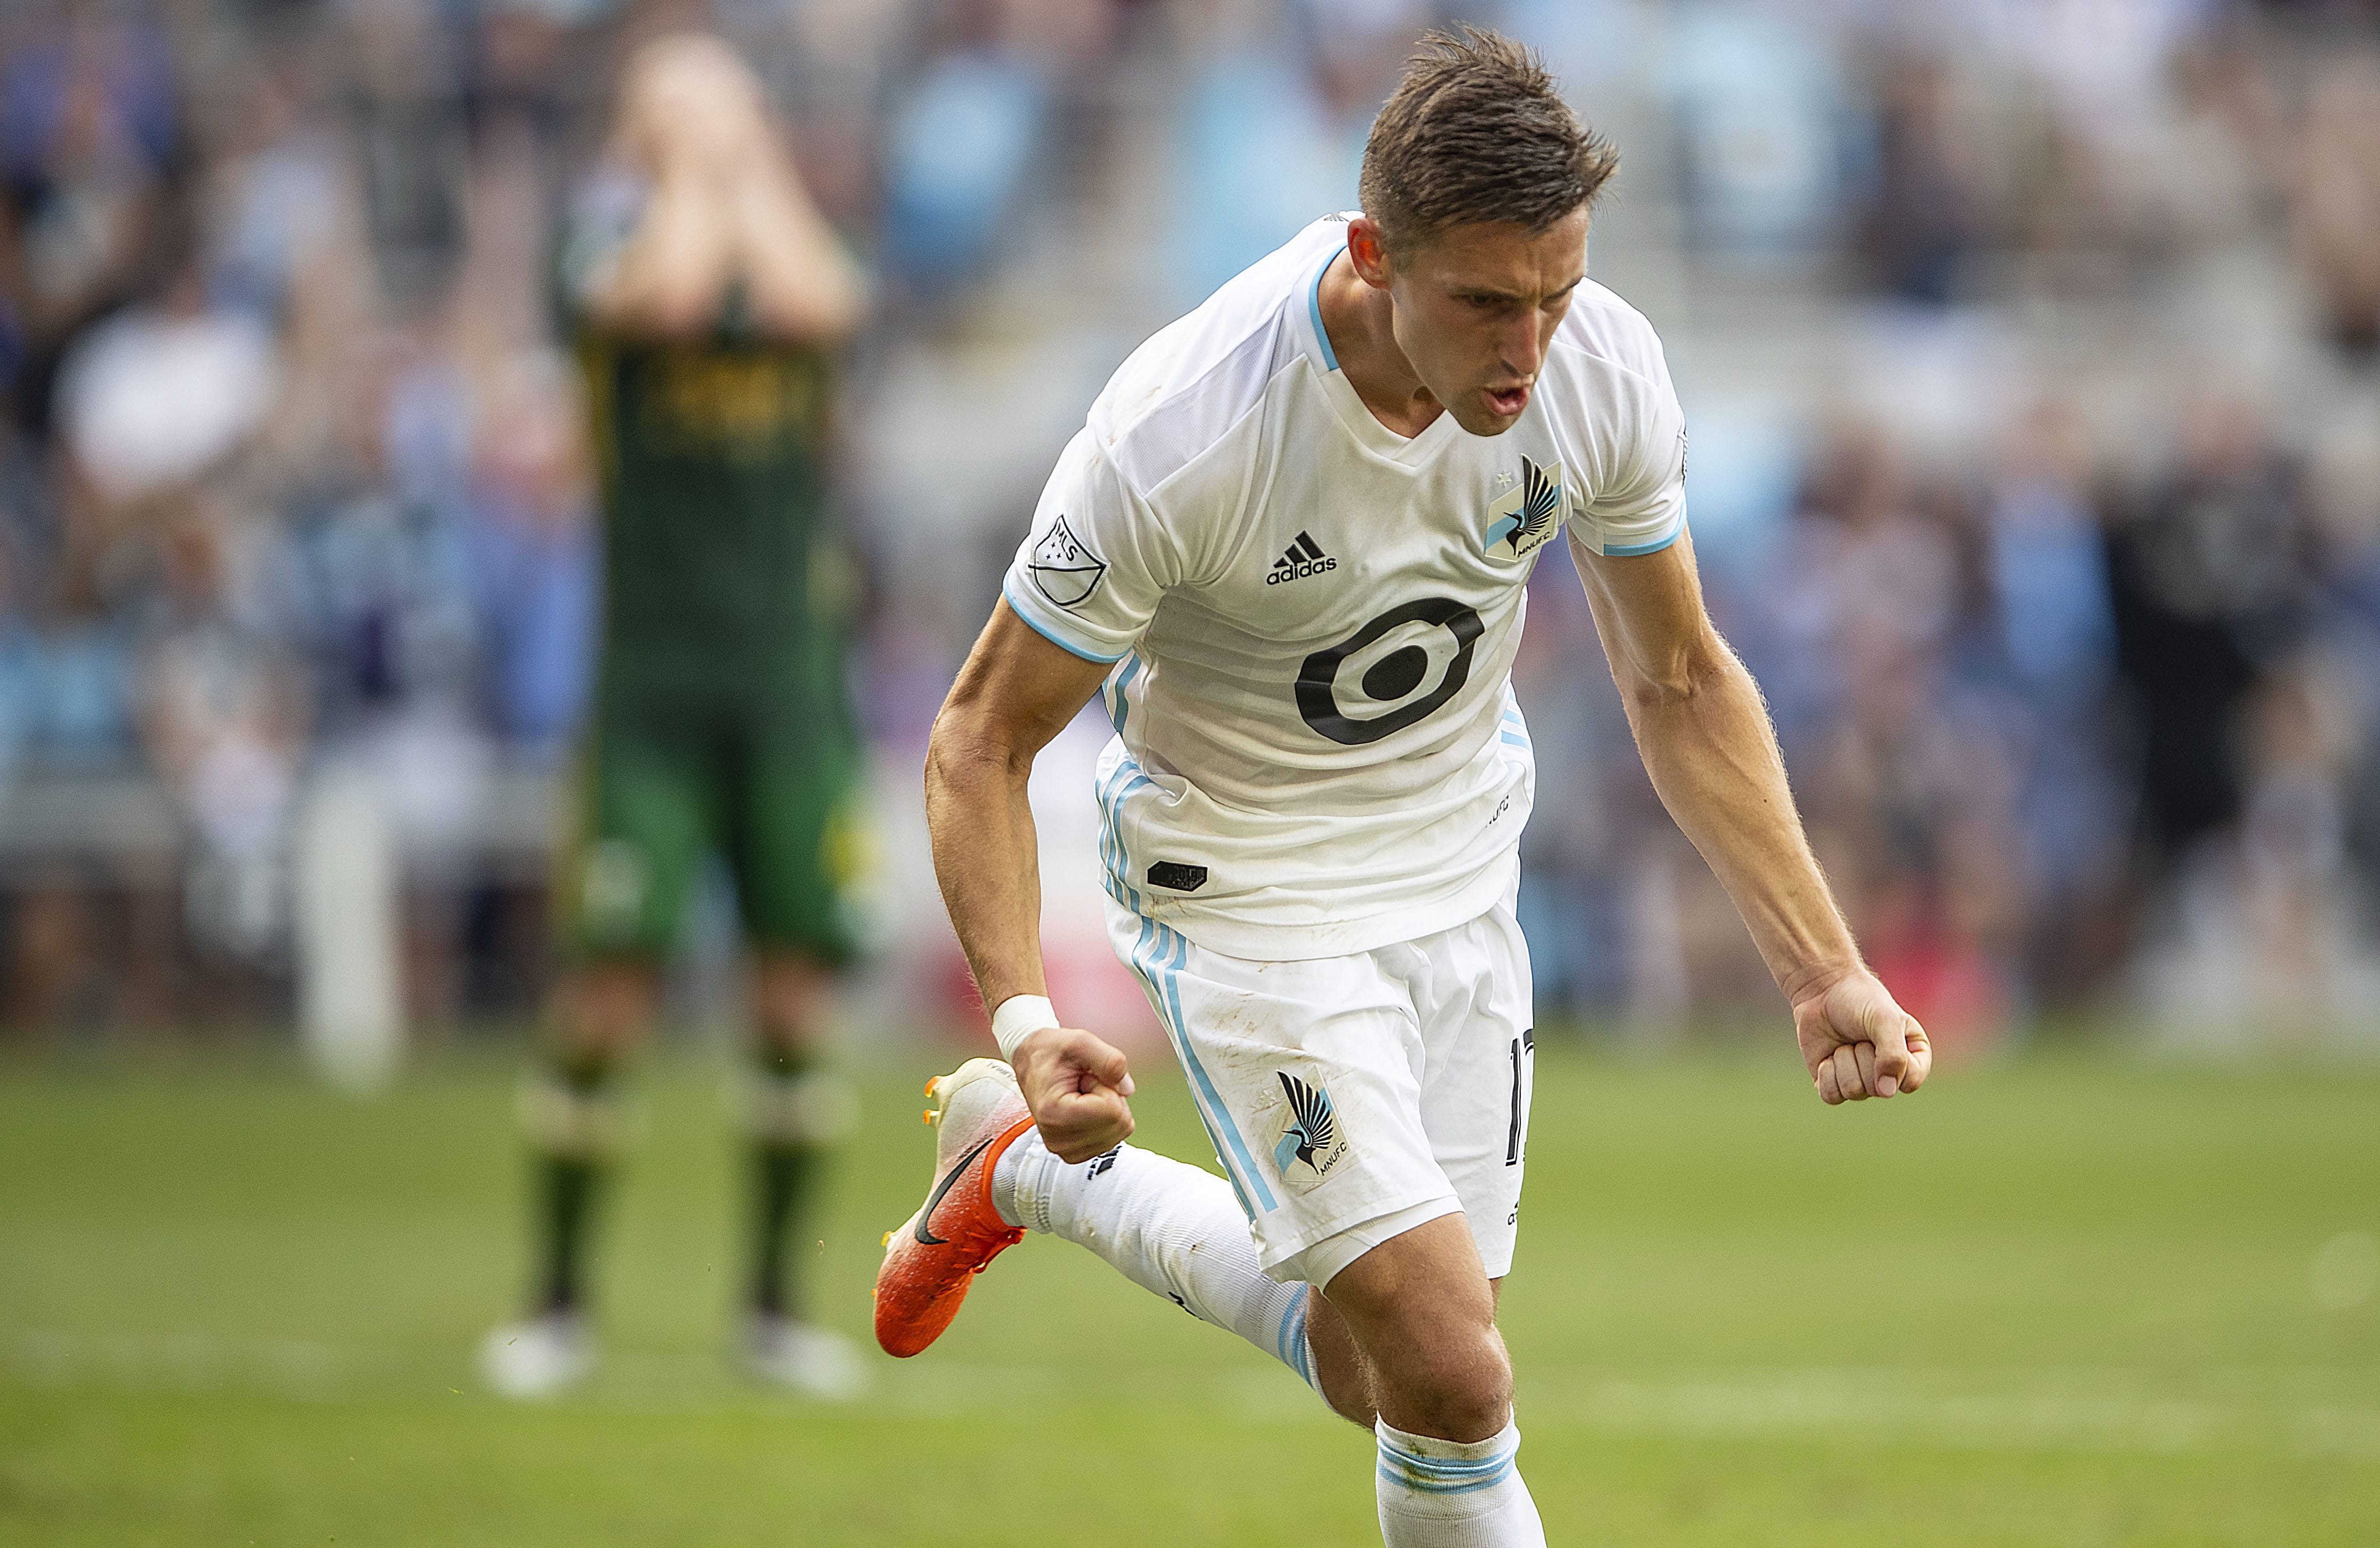 Minnesota United midfielder Ethan Finlay reacts after hitting an MLS soccer match's only goal on a penalty kick during an MLS soccer match against the Portland Timbers, Sunday, Aug. 4, 2019, in St. Paul, Minn.